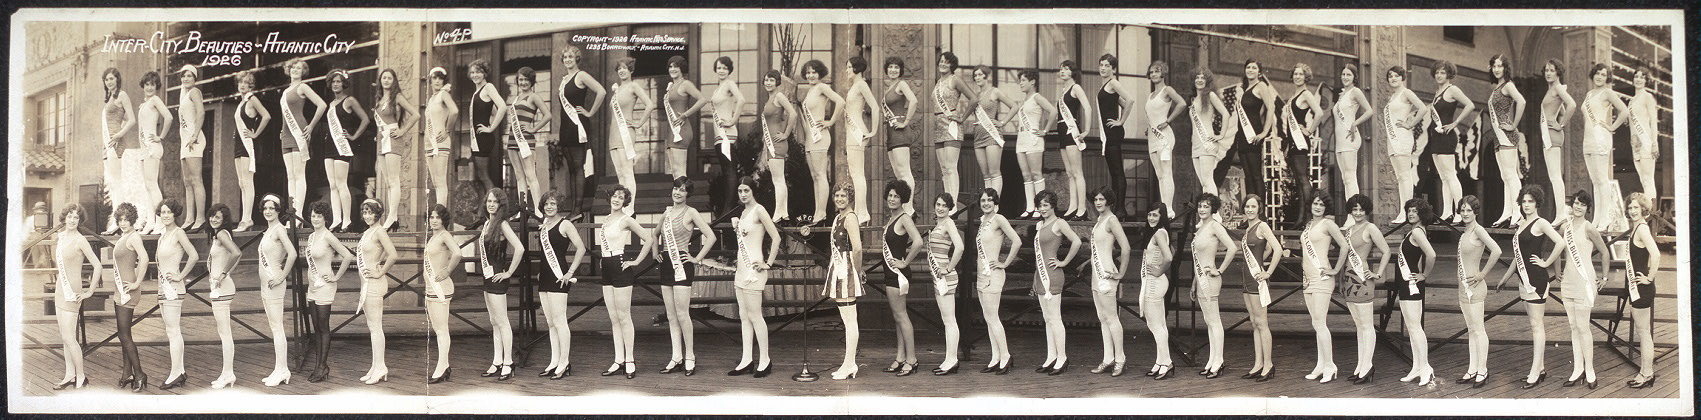 1920s swimsuits contest